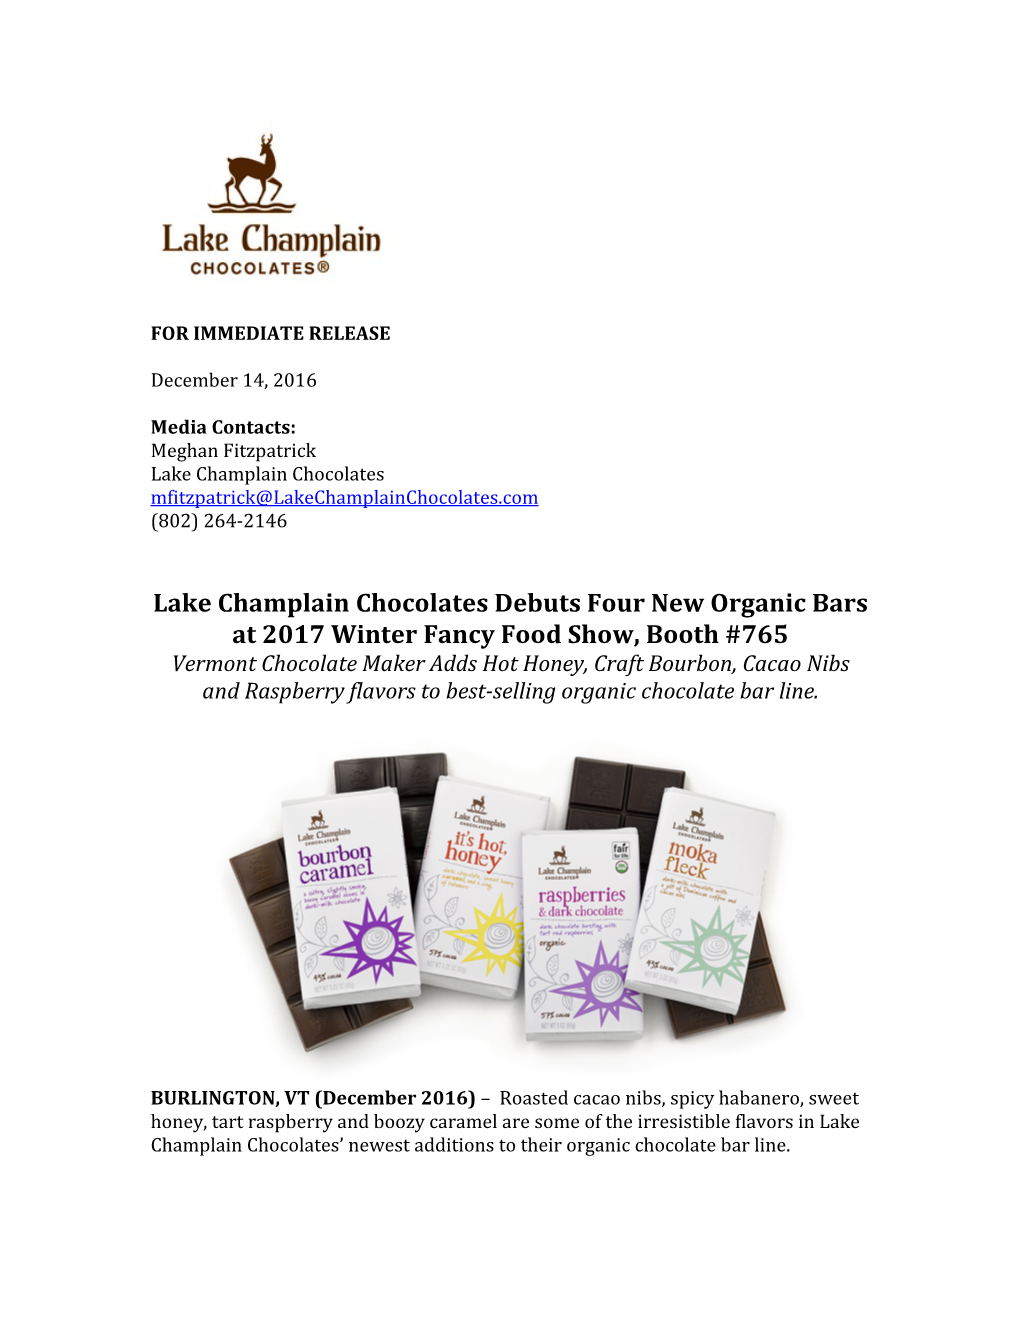 Lake Champlain Chocolates Debuts Four New Organic Bars at 2017 Winter Fancy Food Show, Booth #765